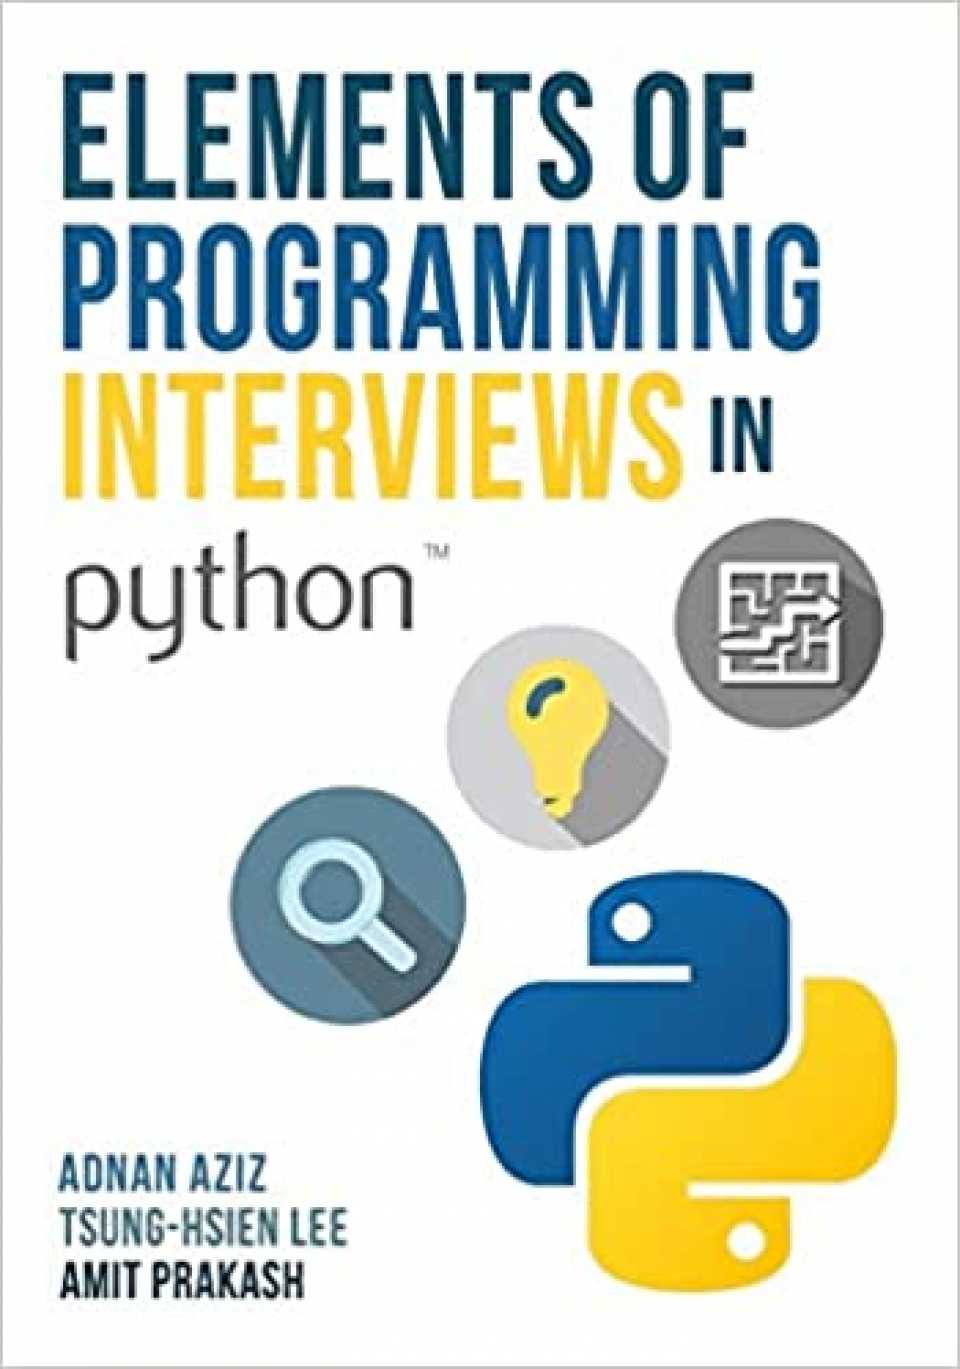 Elements of Programming Interviews in Python